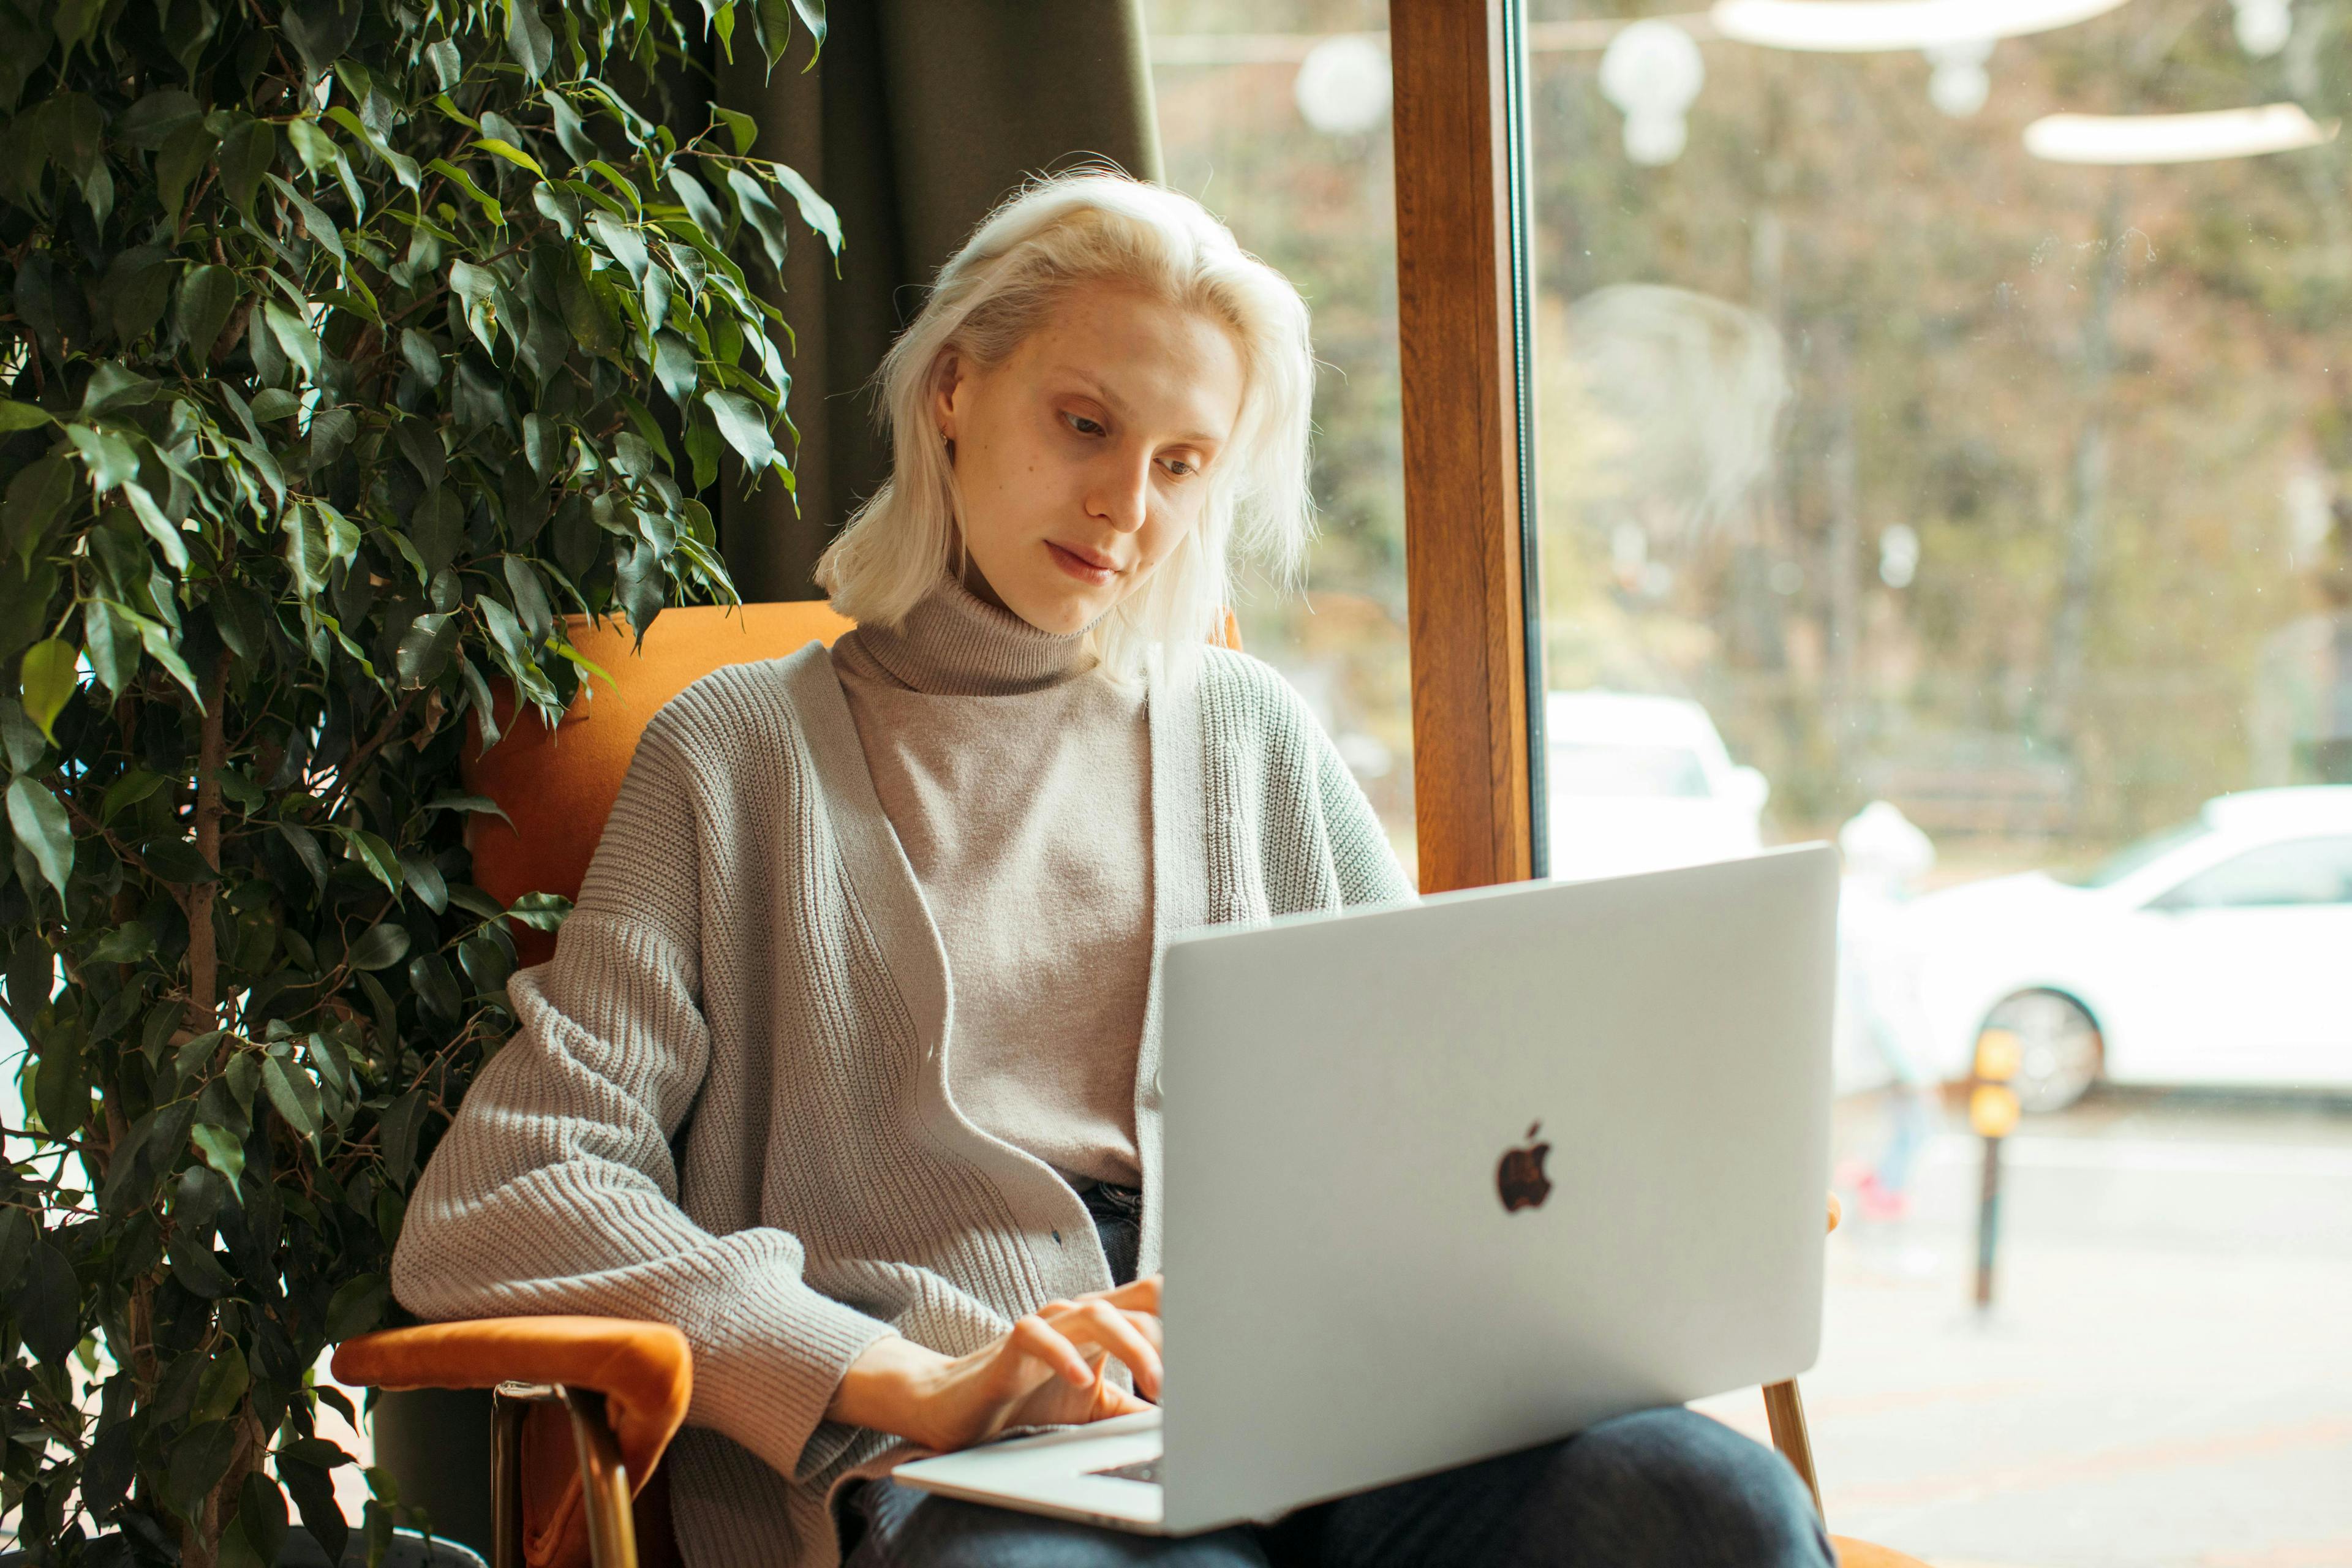 A woman with blonde hair works on her laptop in a cozy chair by a window, surrounded by greenery. This image represents "homes for sale in Page, AZ."